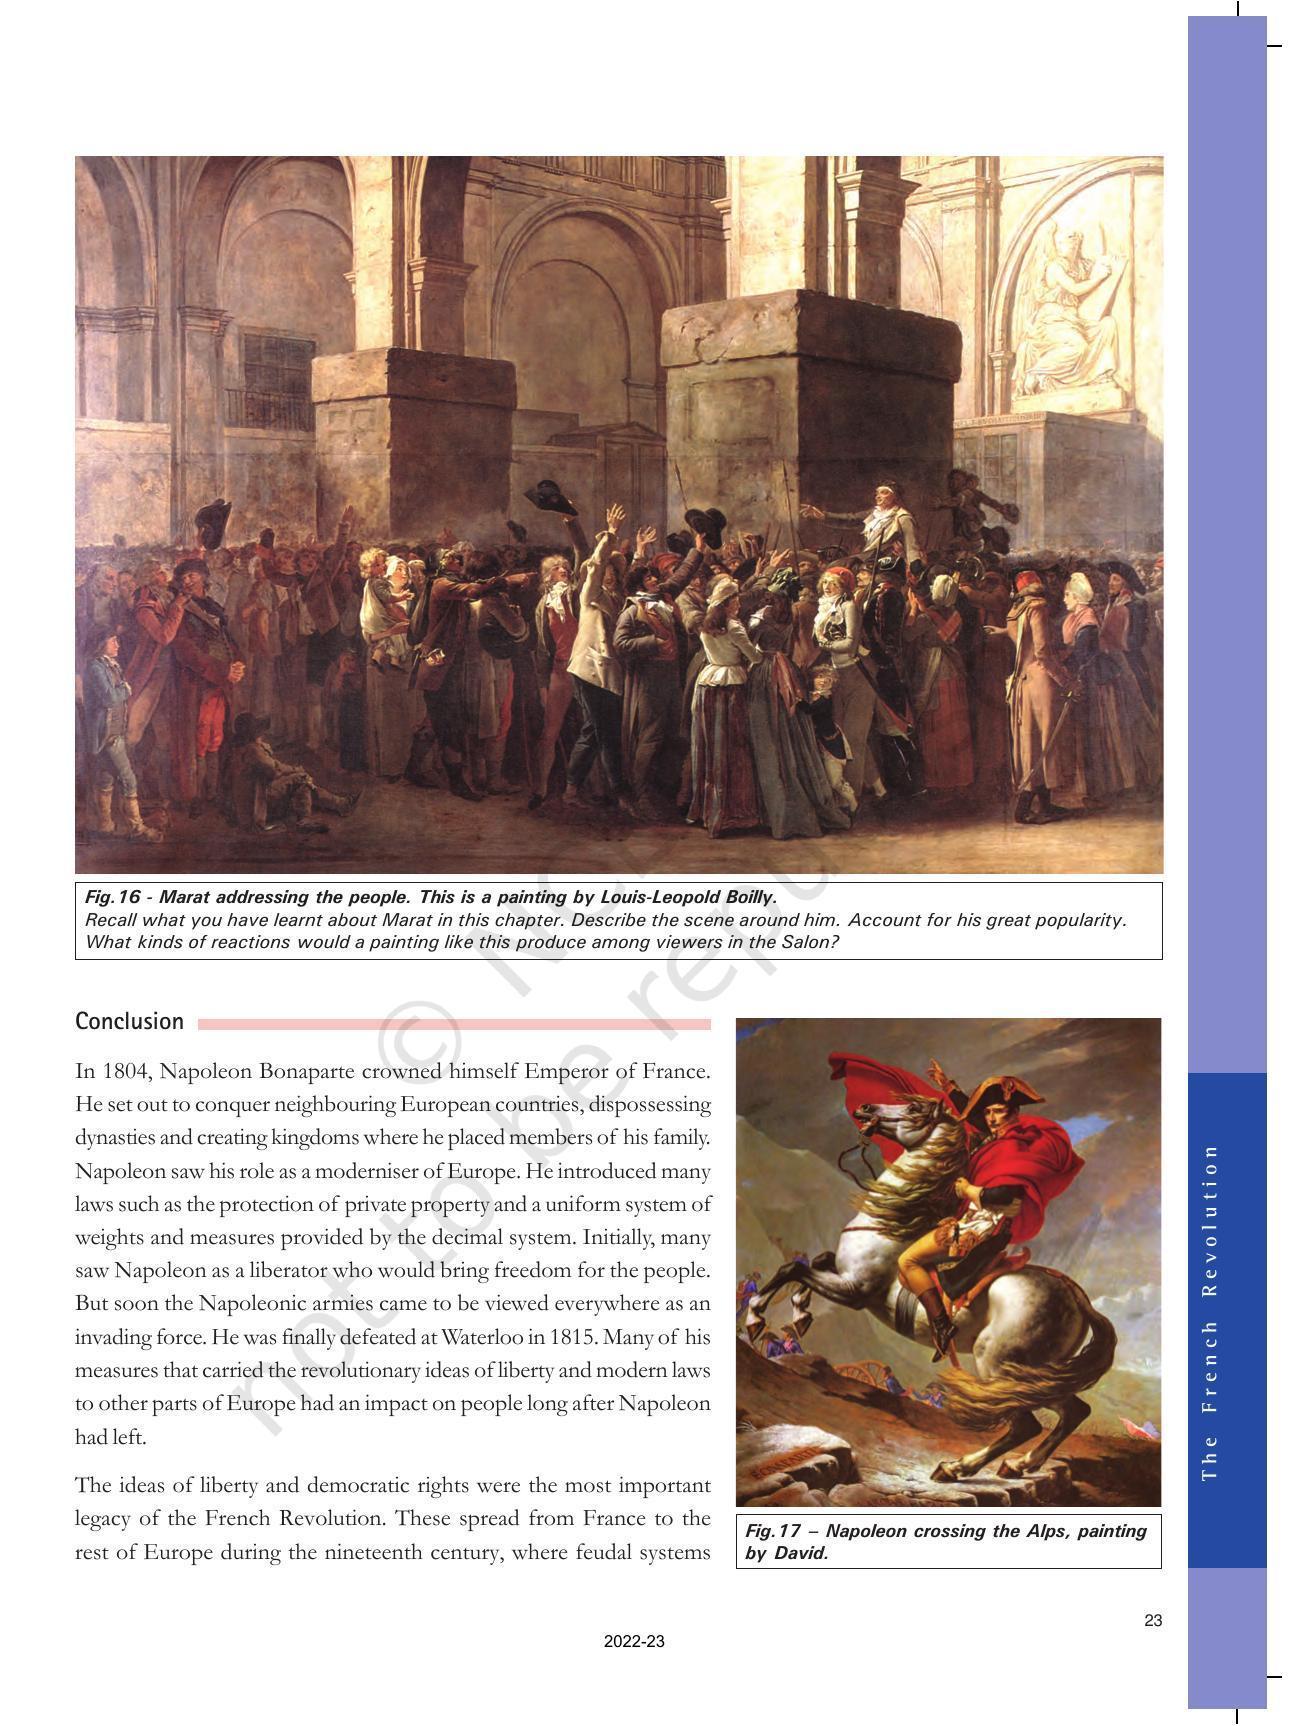 NCERT Book for Class 9 History Chapter 1 The French Revolution - Page 23